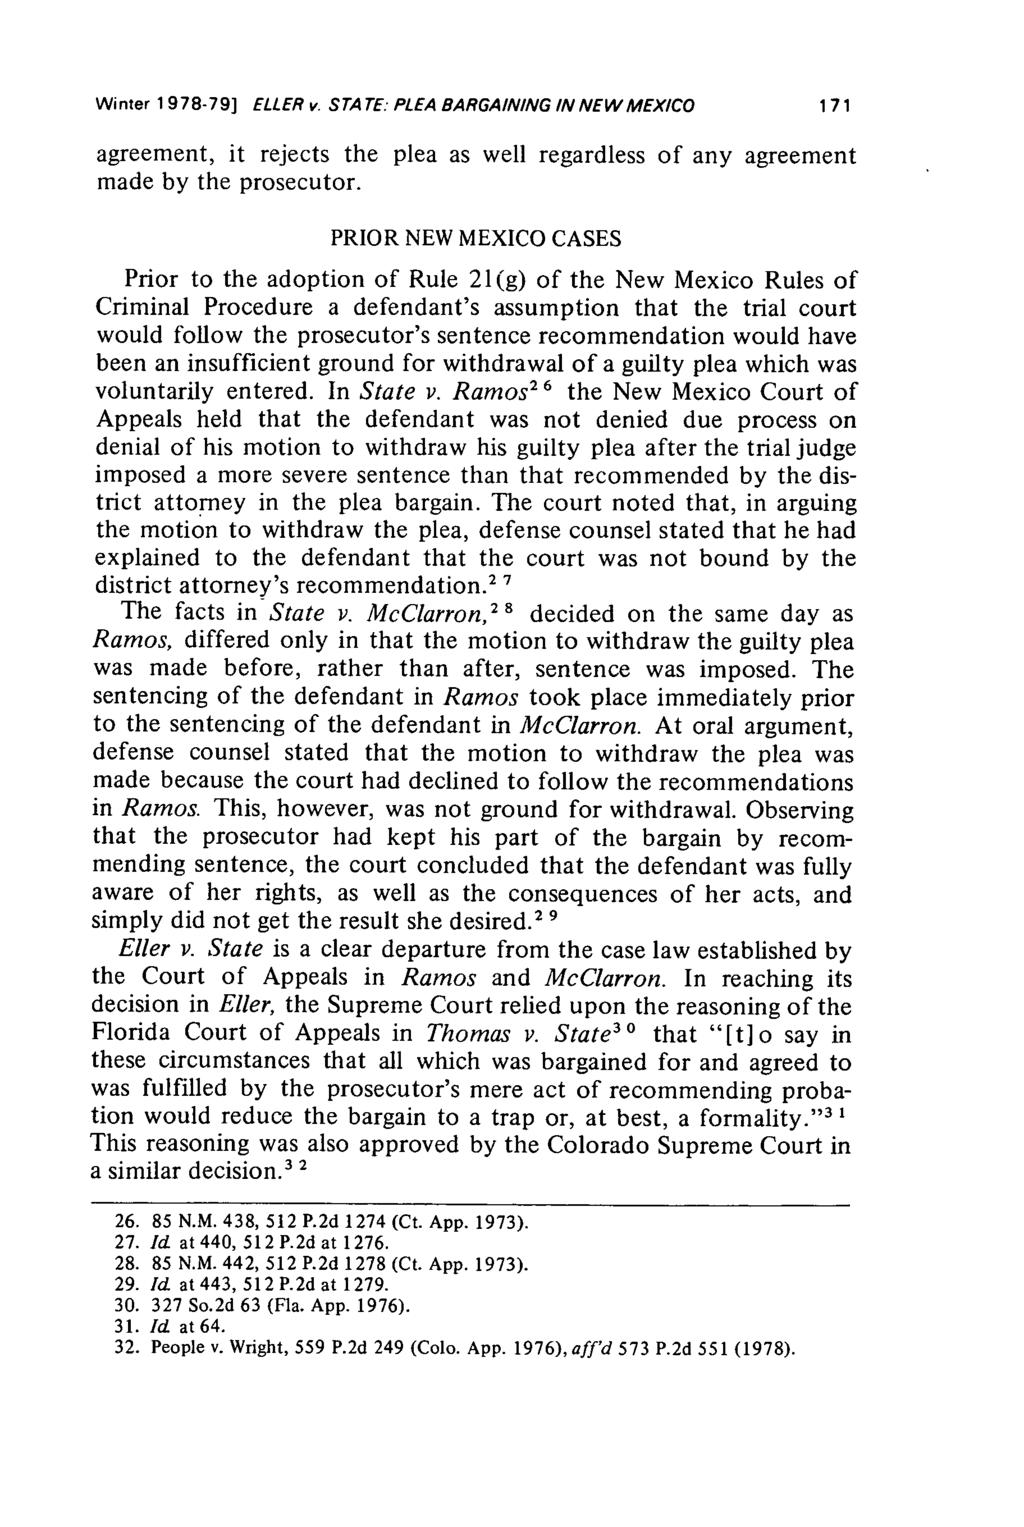 Winter 1978-79] ELLER v. STATE: PLEA BARGAINING INNEWMEXICO agreement, it rejects the plea as well regardless of any agreement made by the prosecutor.